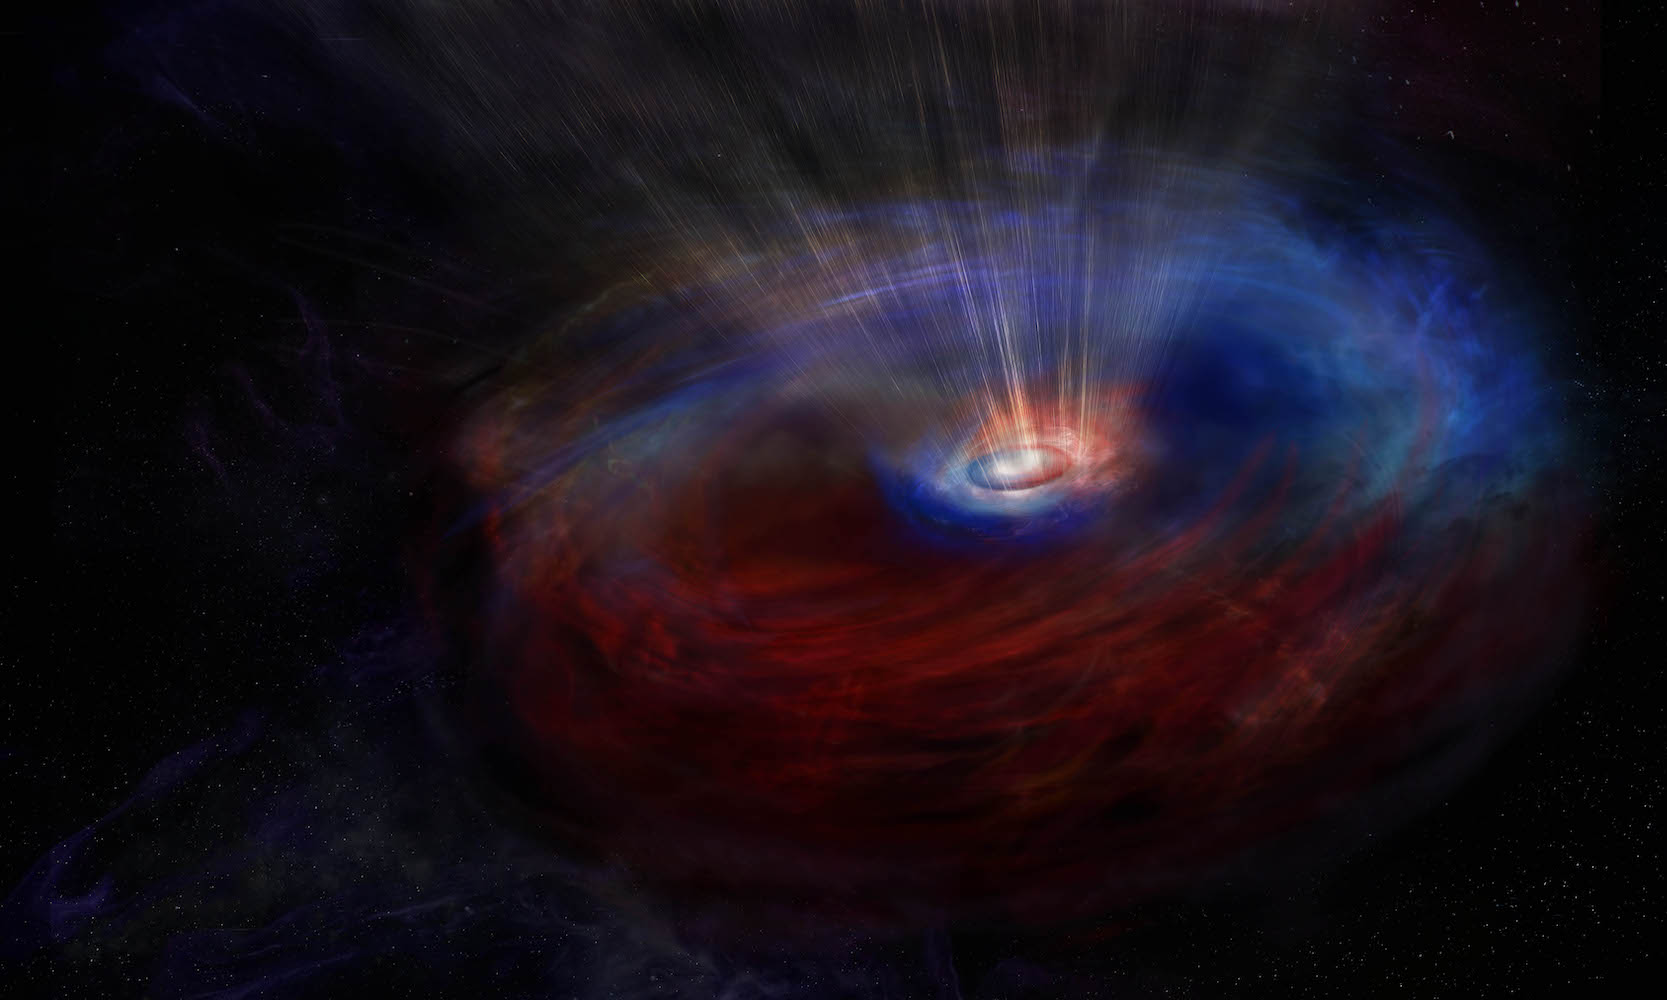 ALMA sees two-way traffic around a black hole